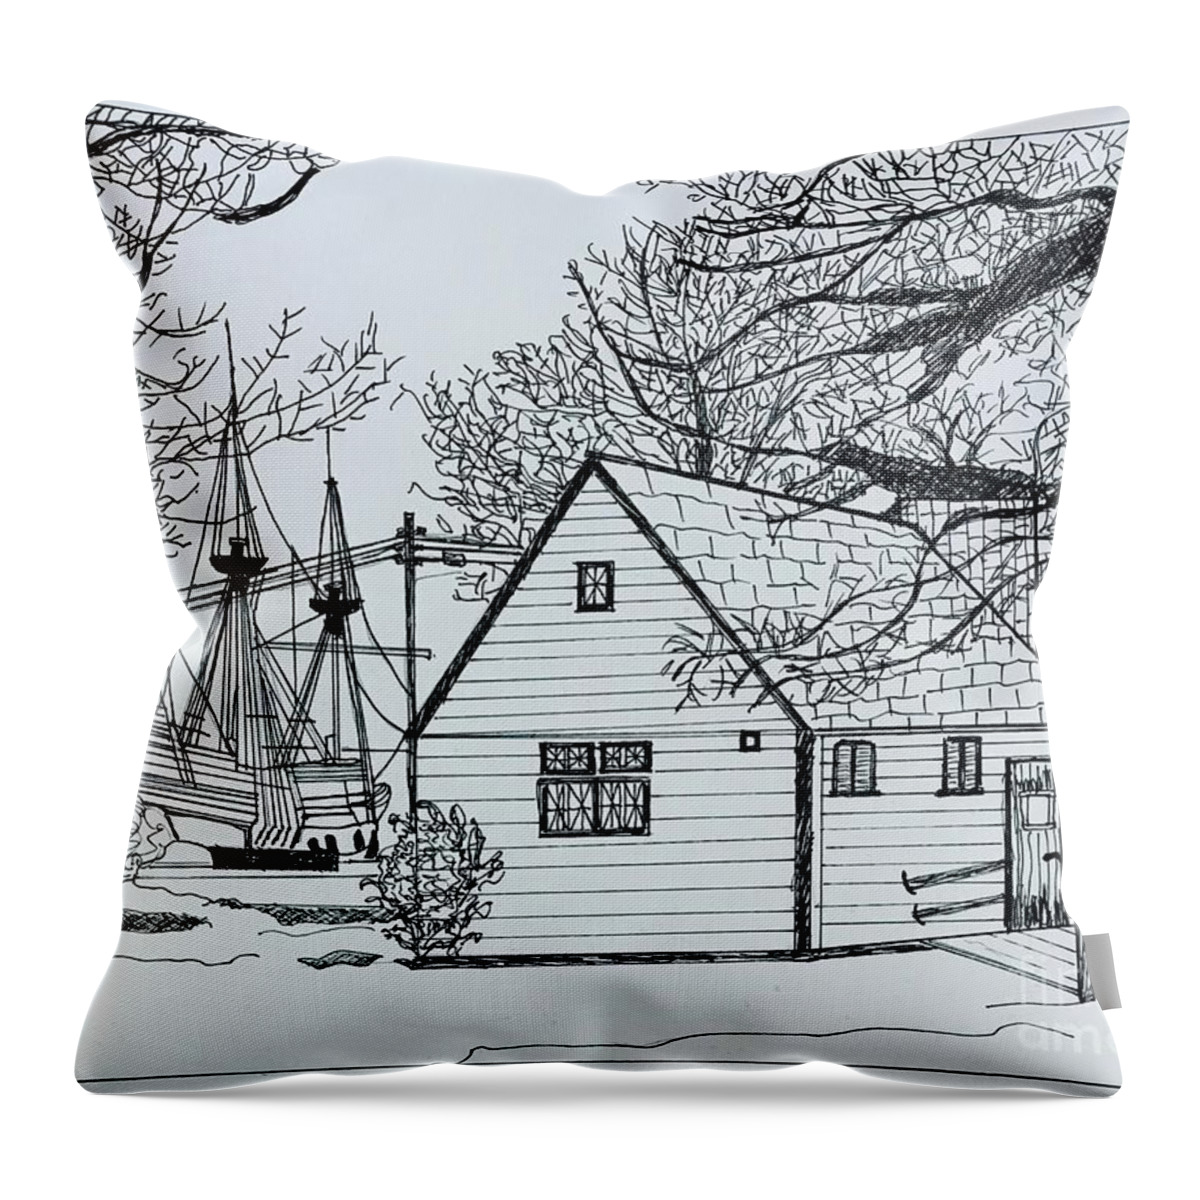 Original Art Work Throw Pillow featuring the drawing Plymouth, Massachusetts by Theresa Honeycheck